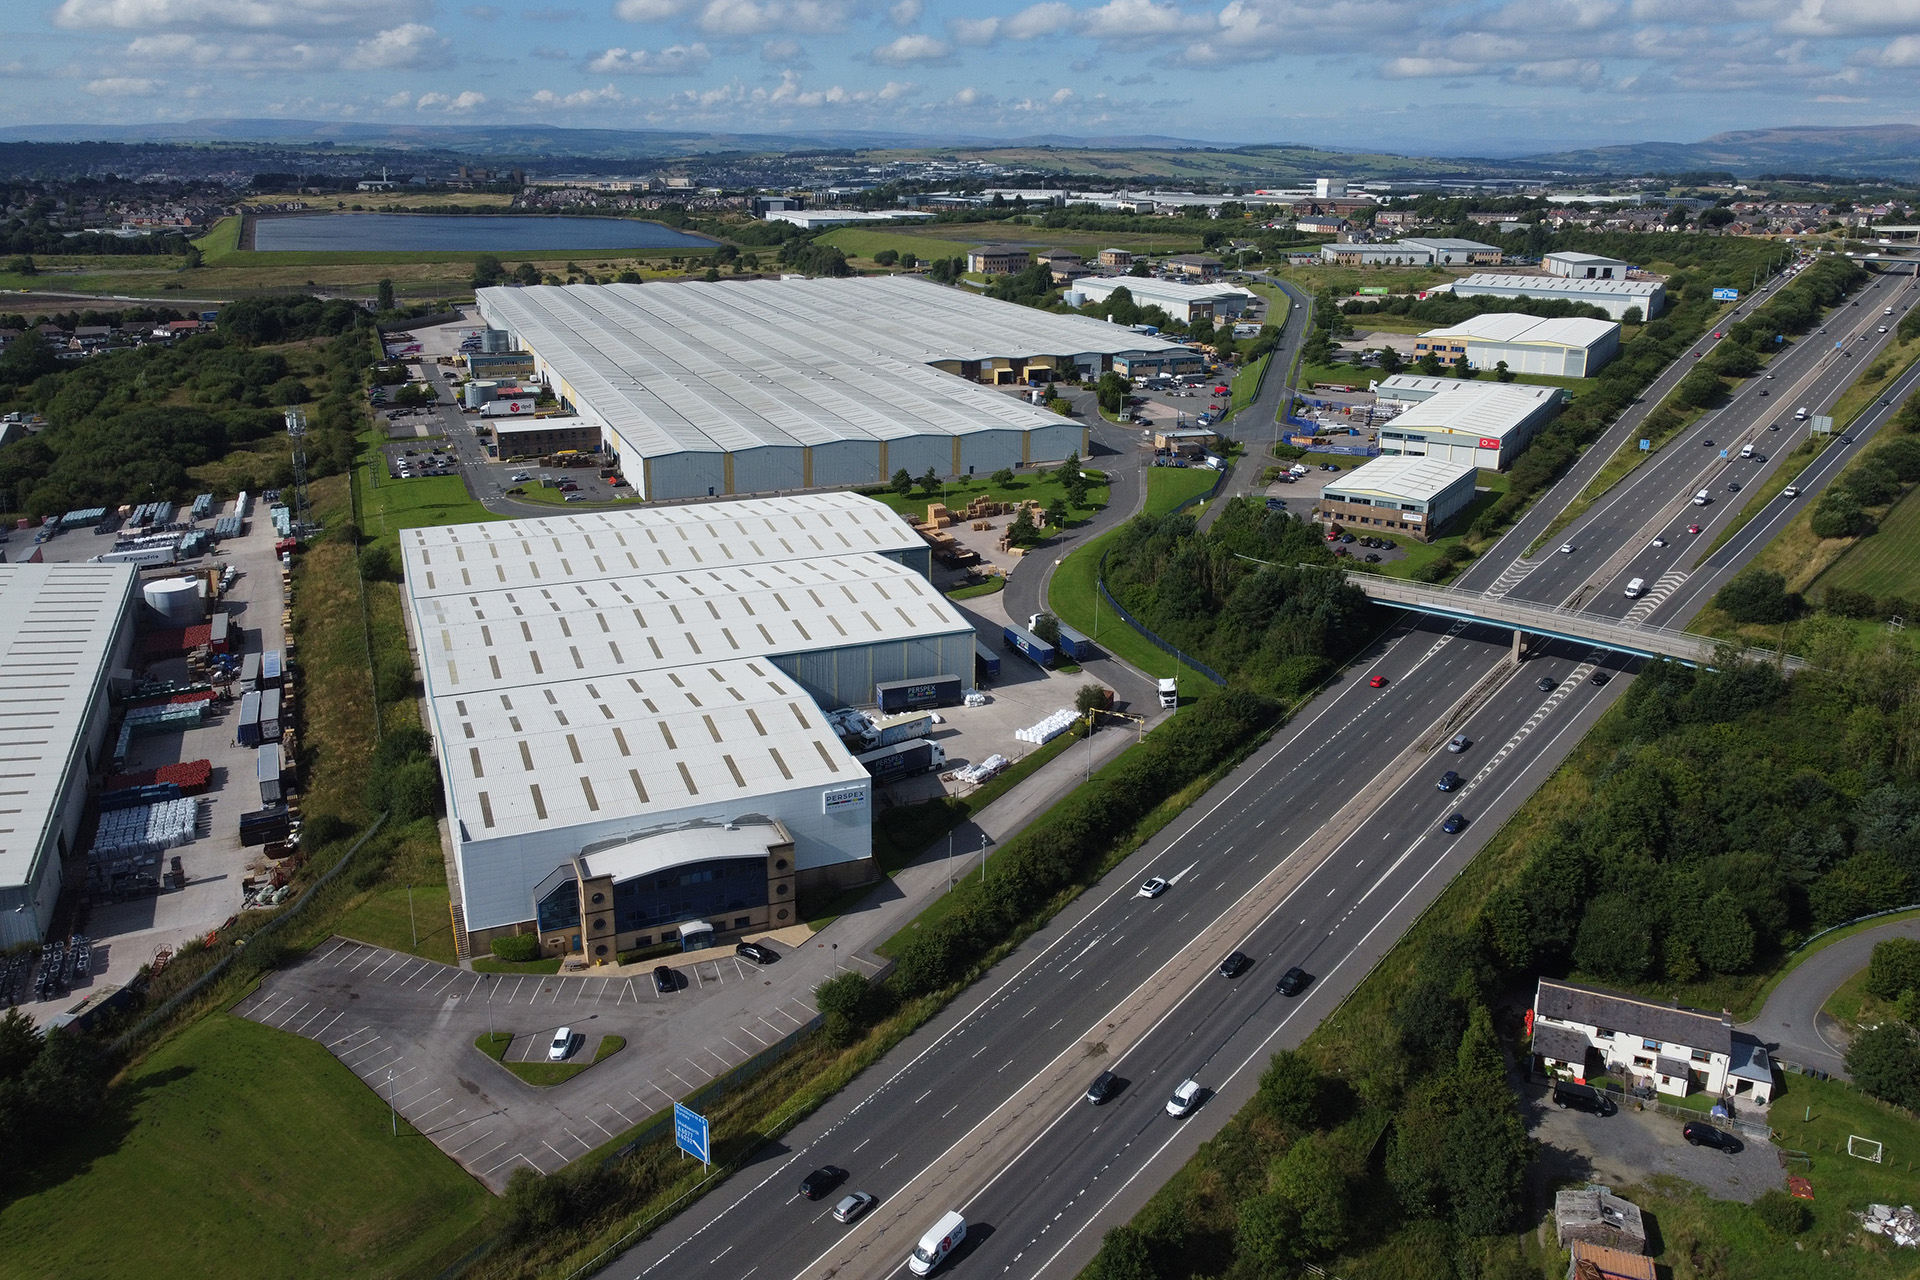 Demand for industrial property outstrips expectations - https://roomslocal.co.uk/blog/demand-for-industrial-property-outstrips-expectations #industrial #property #outstrips #expectations #industrial